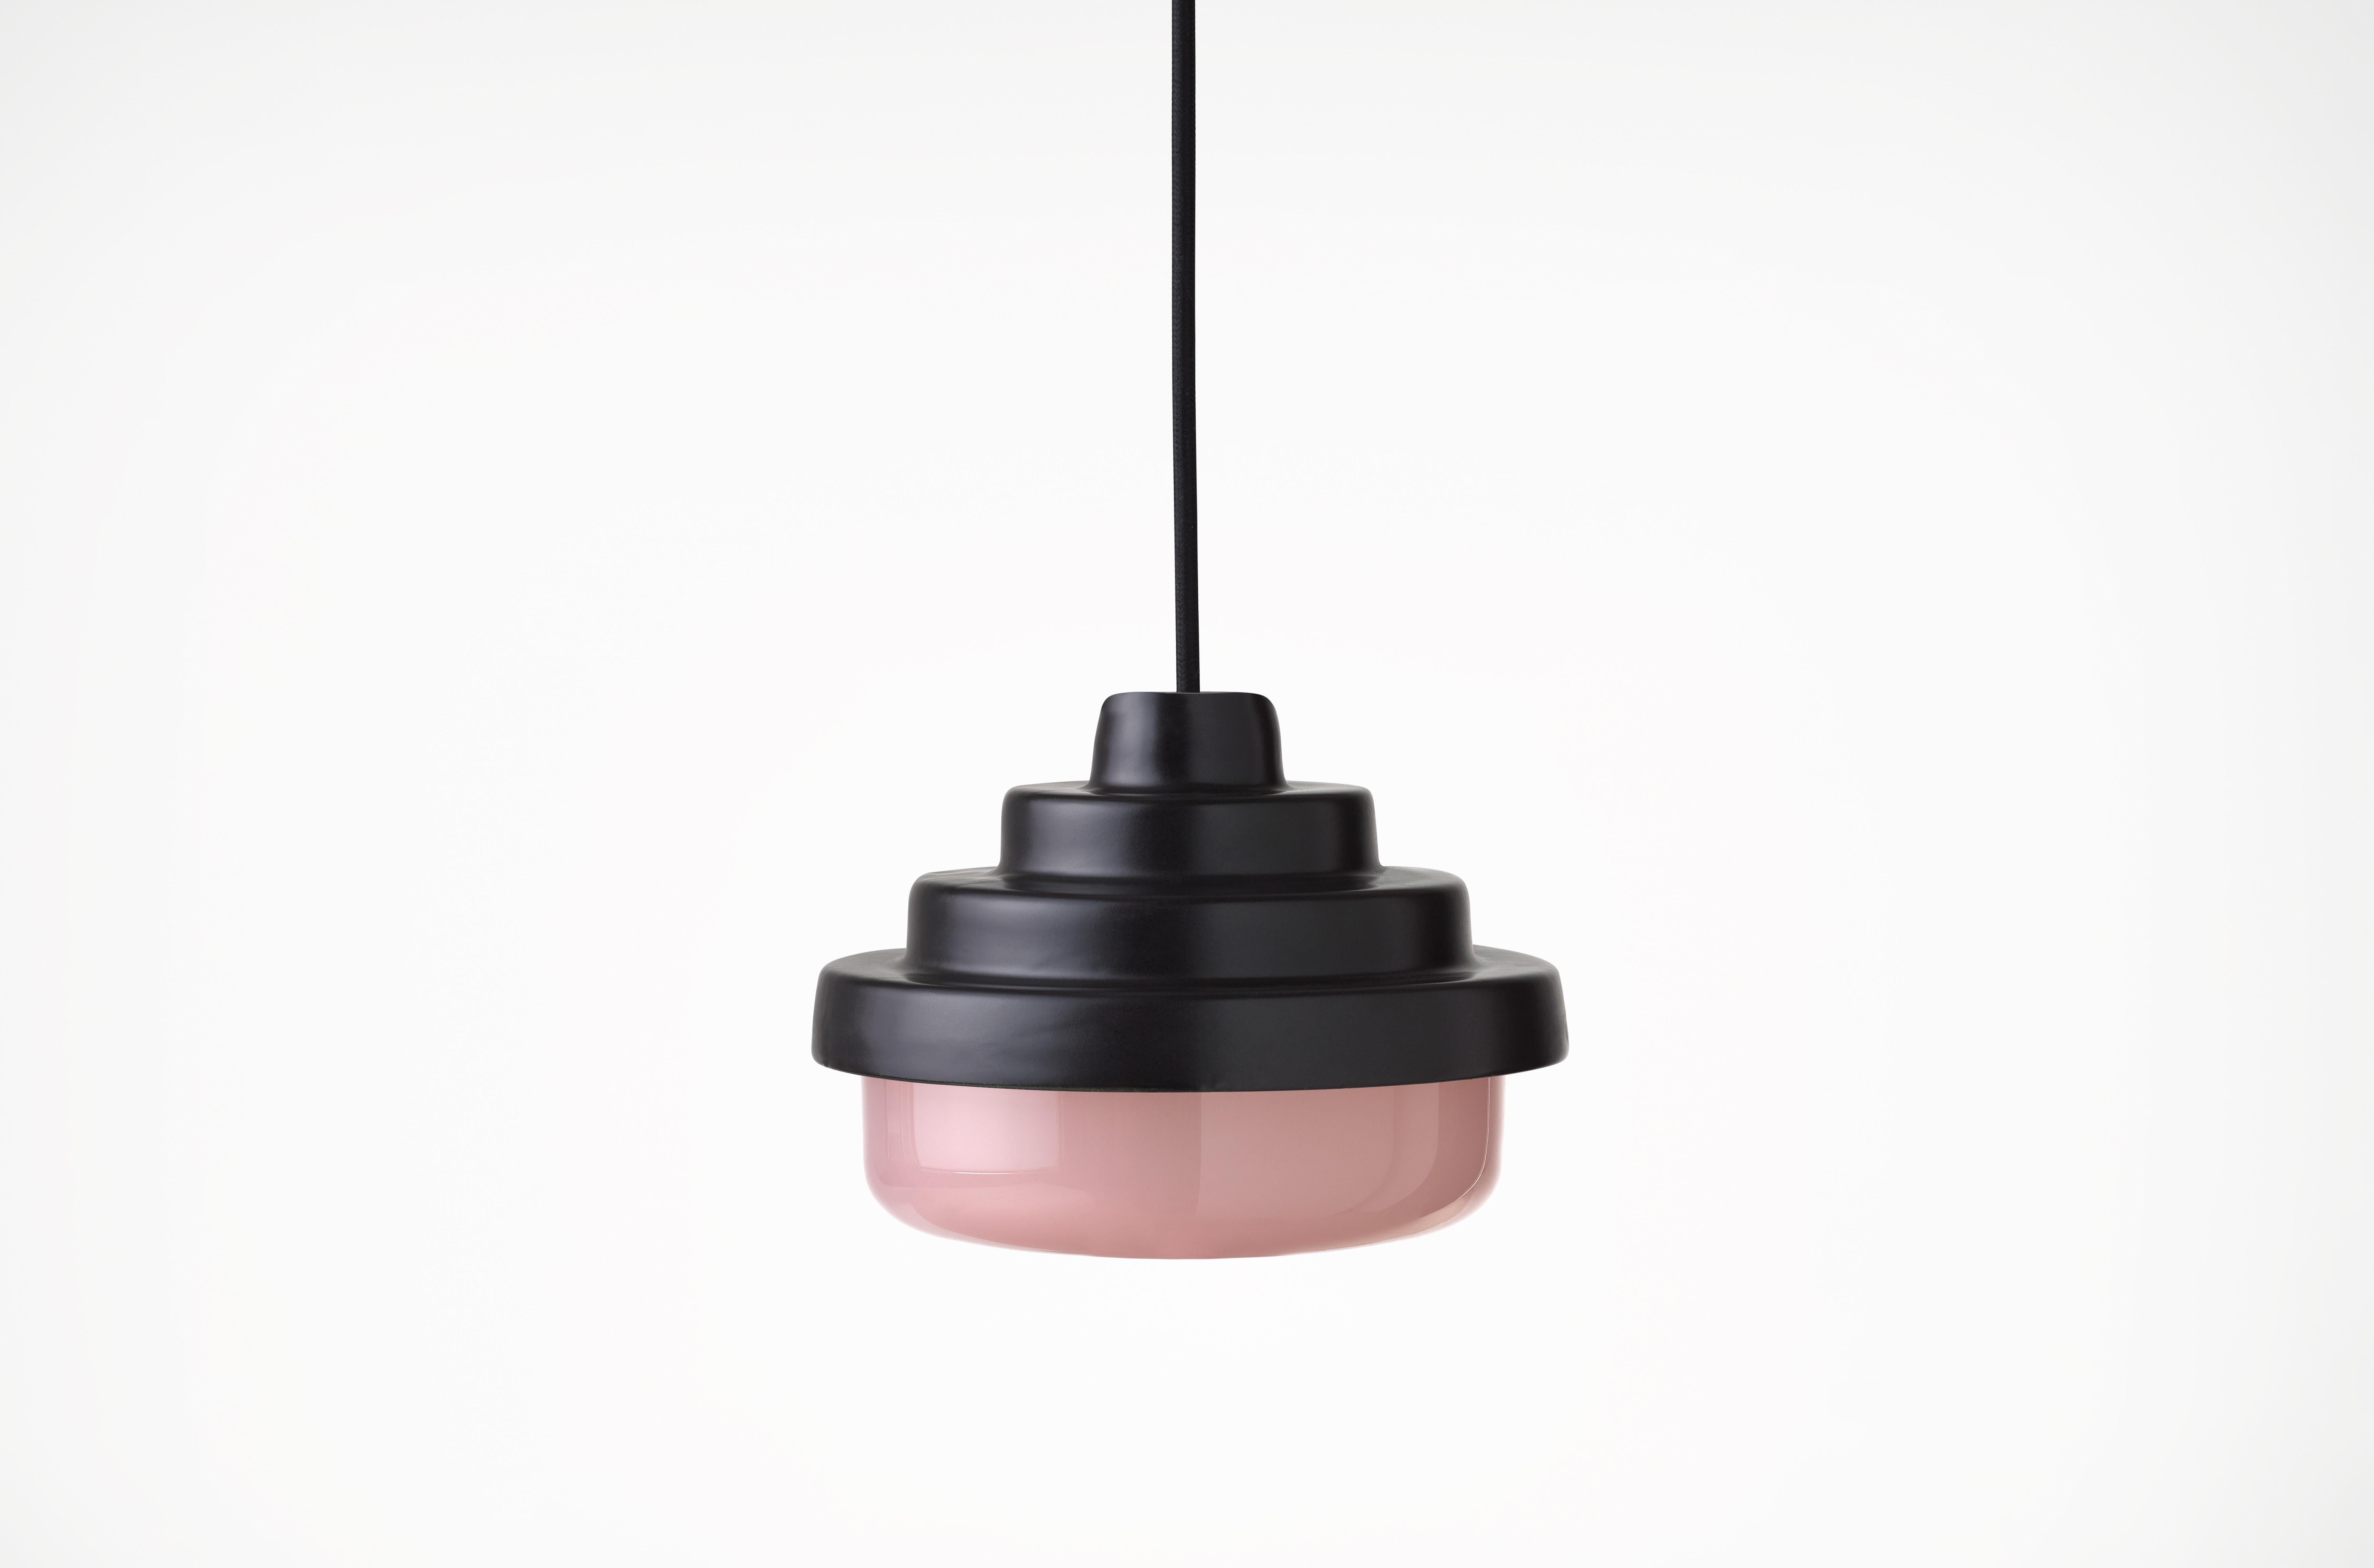 Black and Pink Honey Pendant Light by Coco Flip
Dimensions: D 18 x W 18 x H 13 cm
Materials: Slip cast ceramic stoneware with blown glass. 
Weight: Approx. 2kg
Glass finishes: Pink
Ceramic finishes: Black satin glaze. 

Standard fixtures included
1